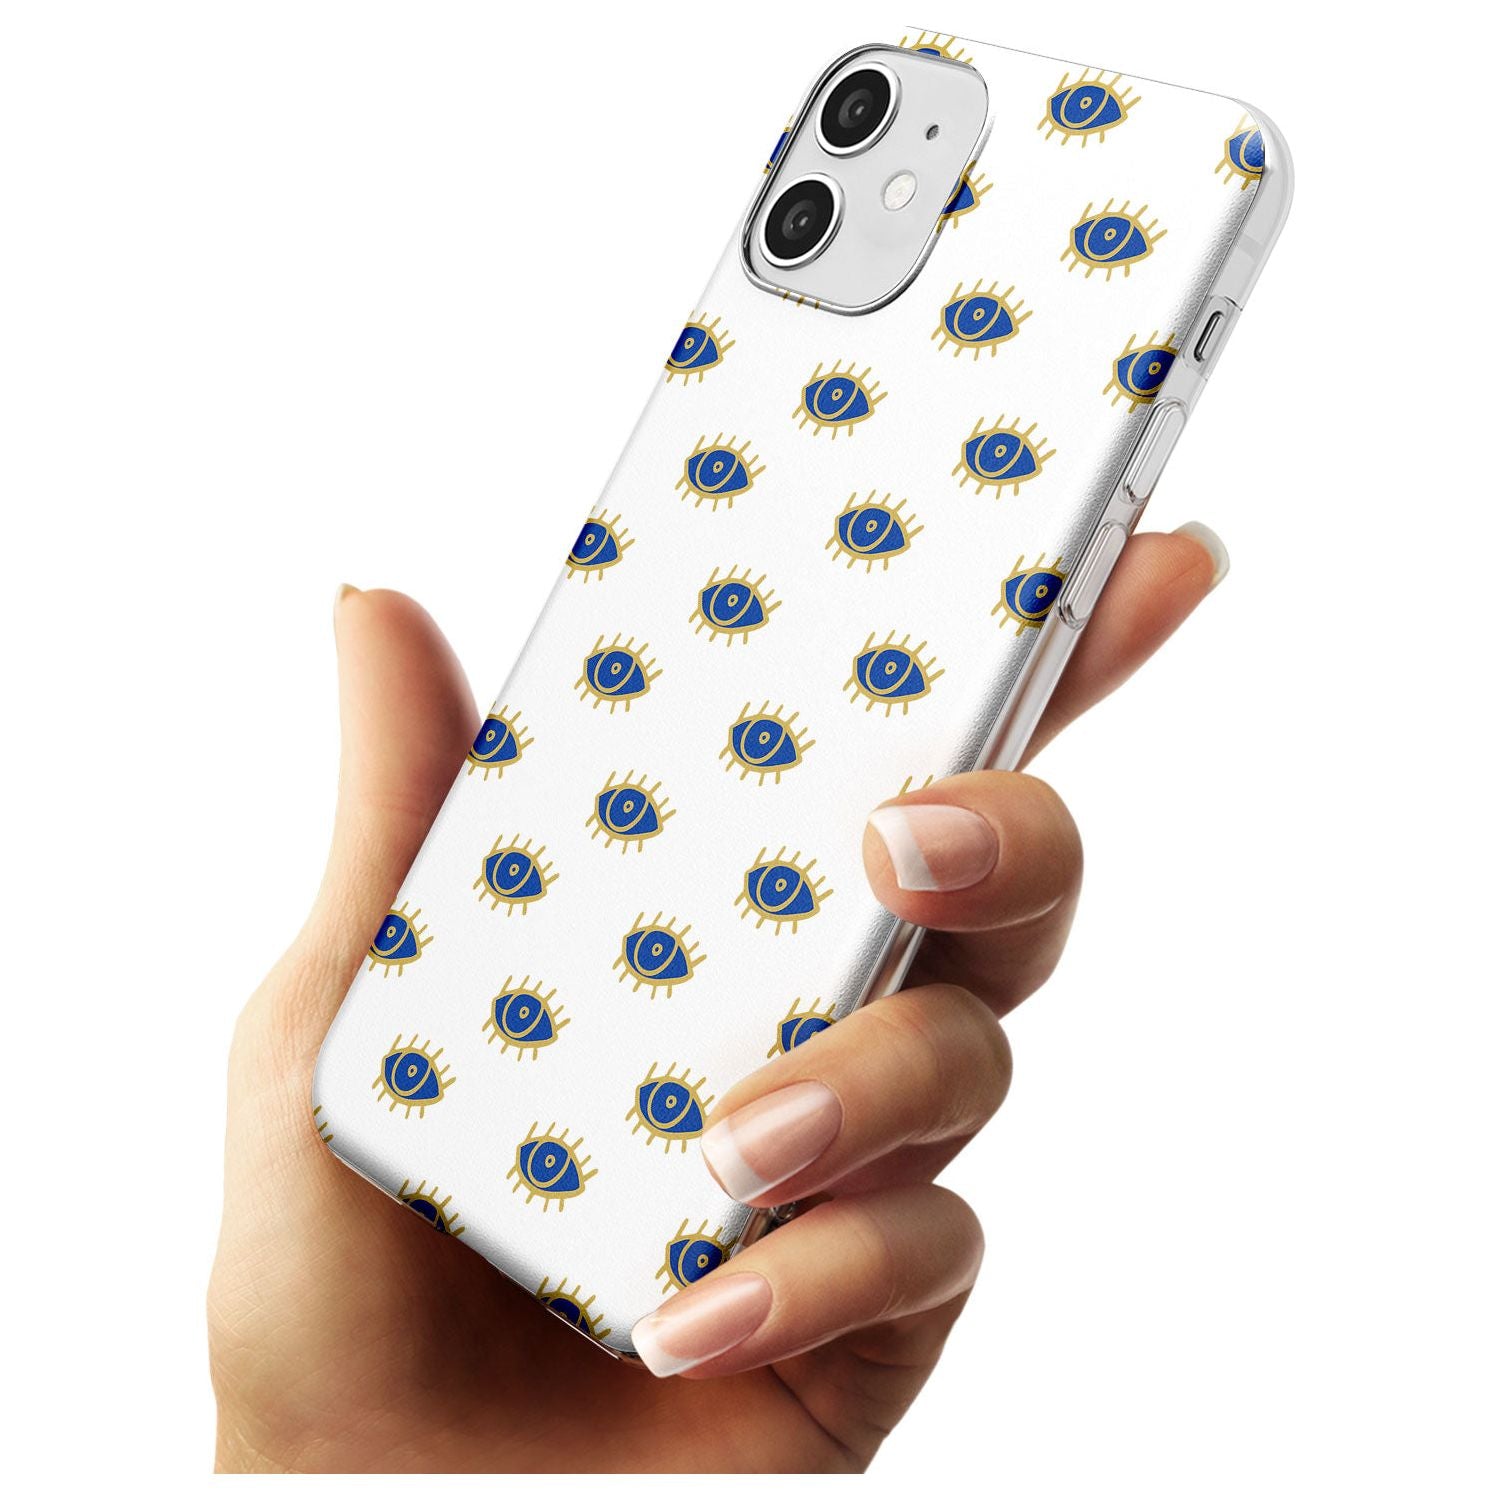 Gold Eyes Psychedelic Eyes Pattern Slim TPU Phone Case for iPhone 11